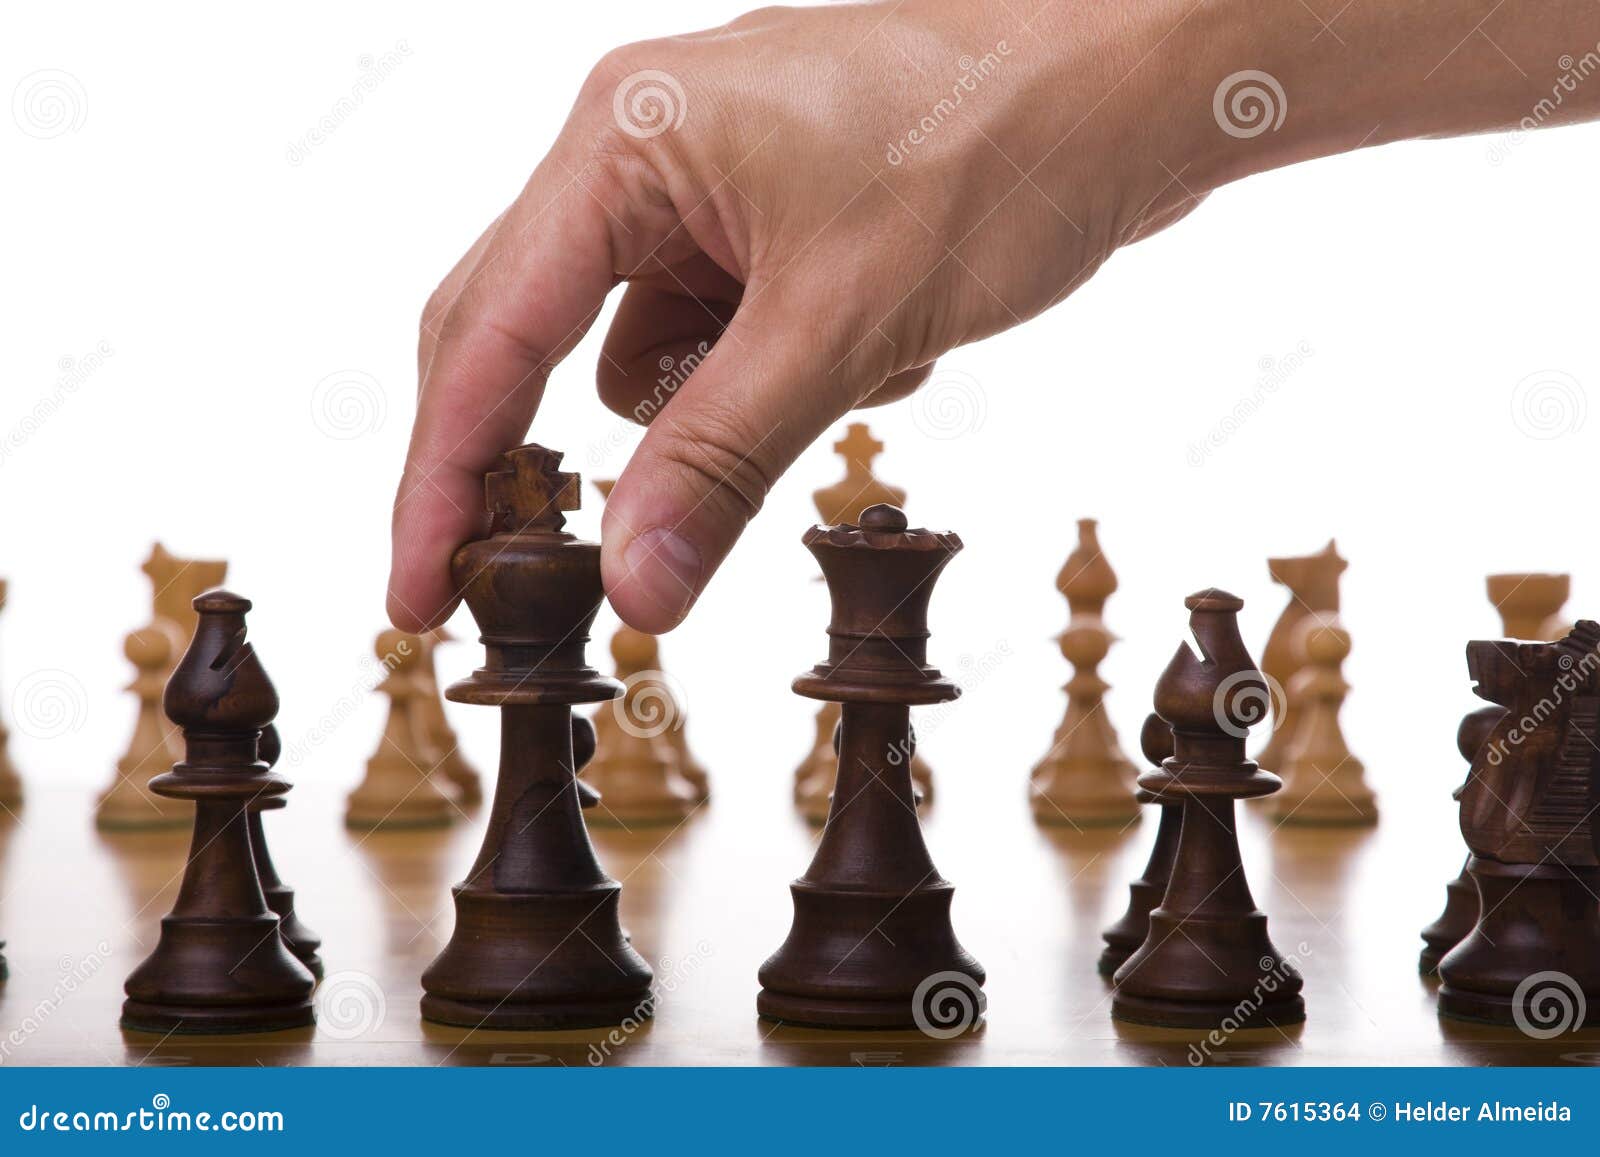 Child Thinking about Next Move Stock Image - Image of move, battle: 34909255